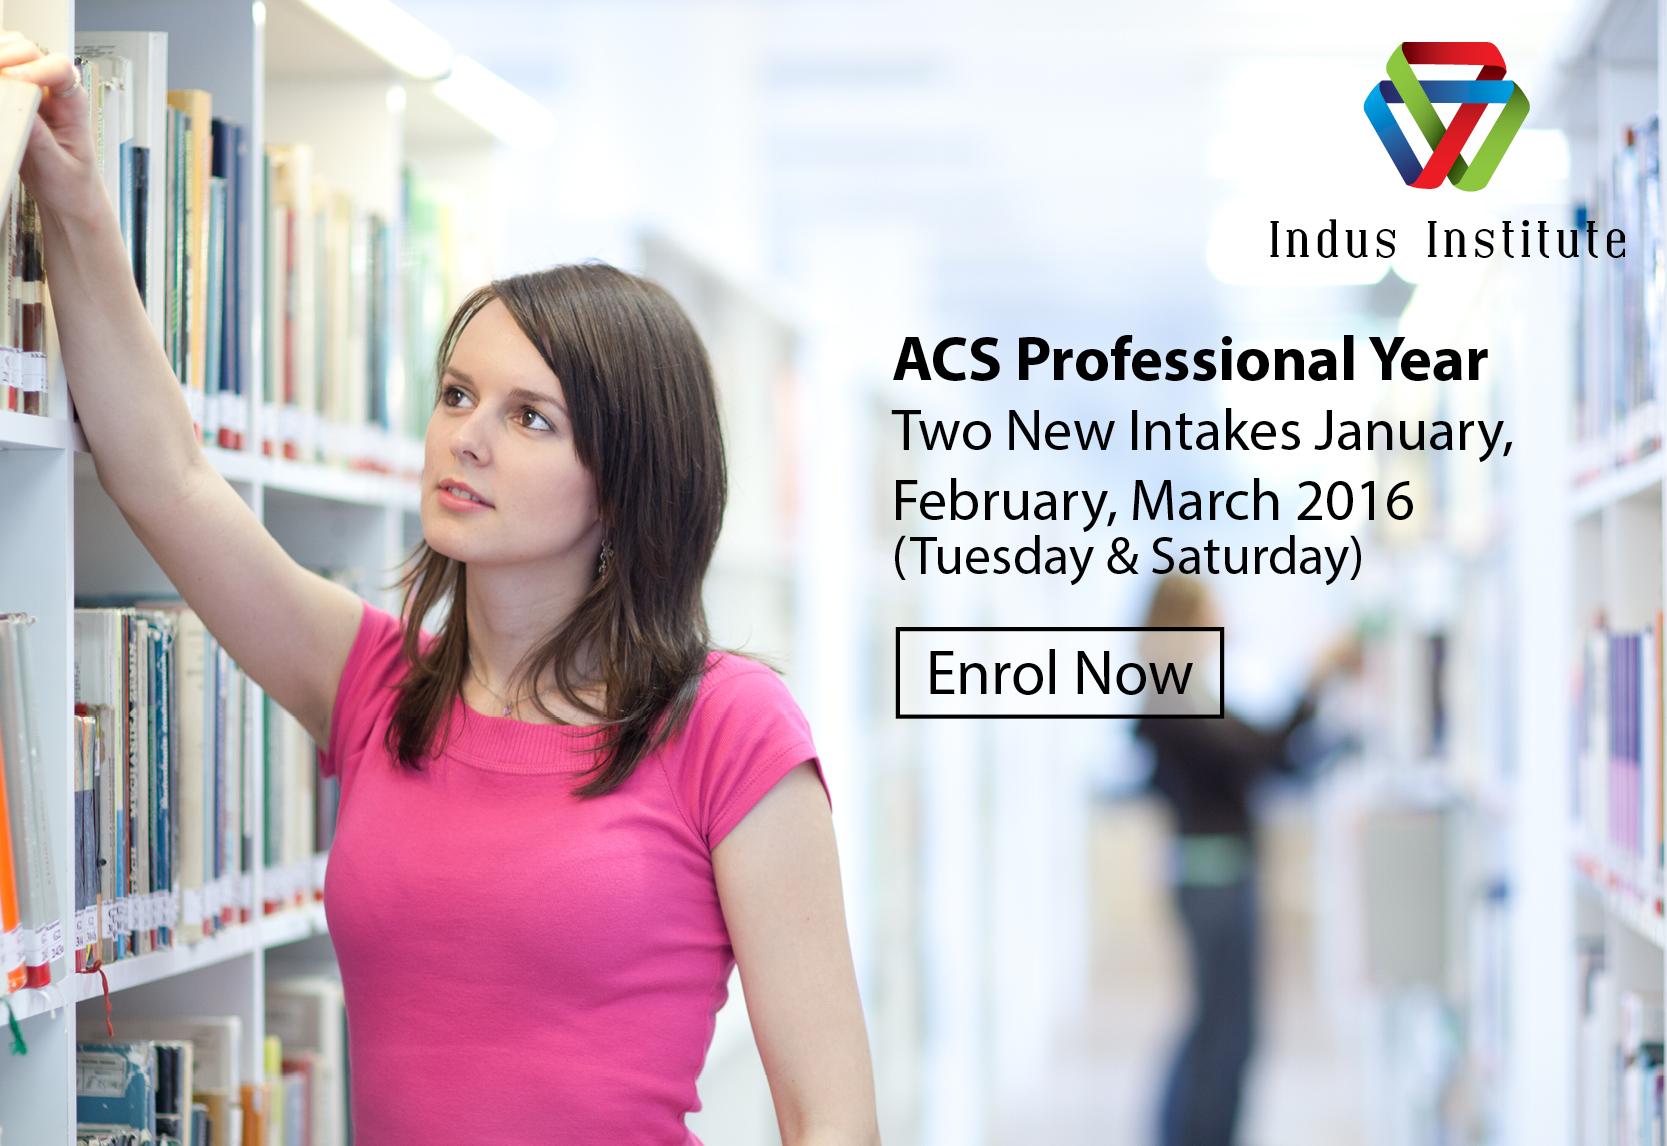 ACS Professional Year – New Intakes For February & March 2016